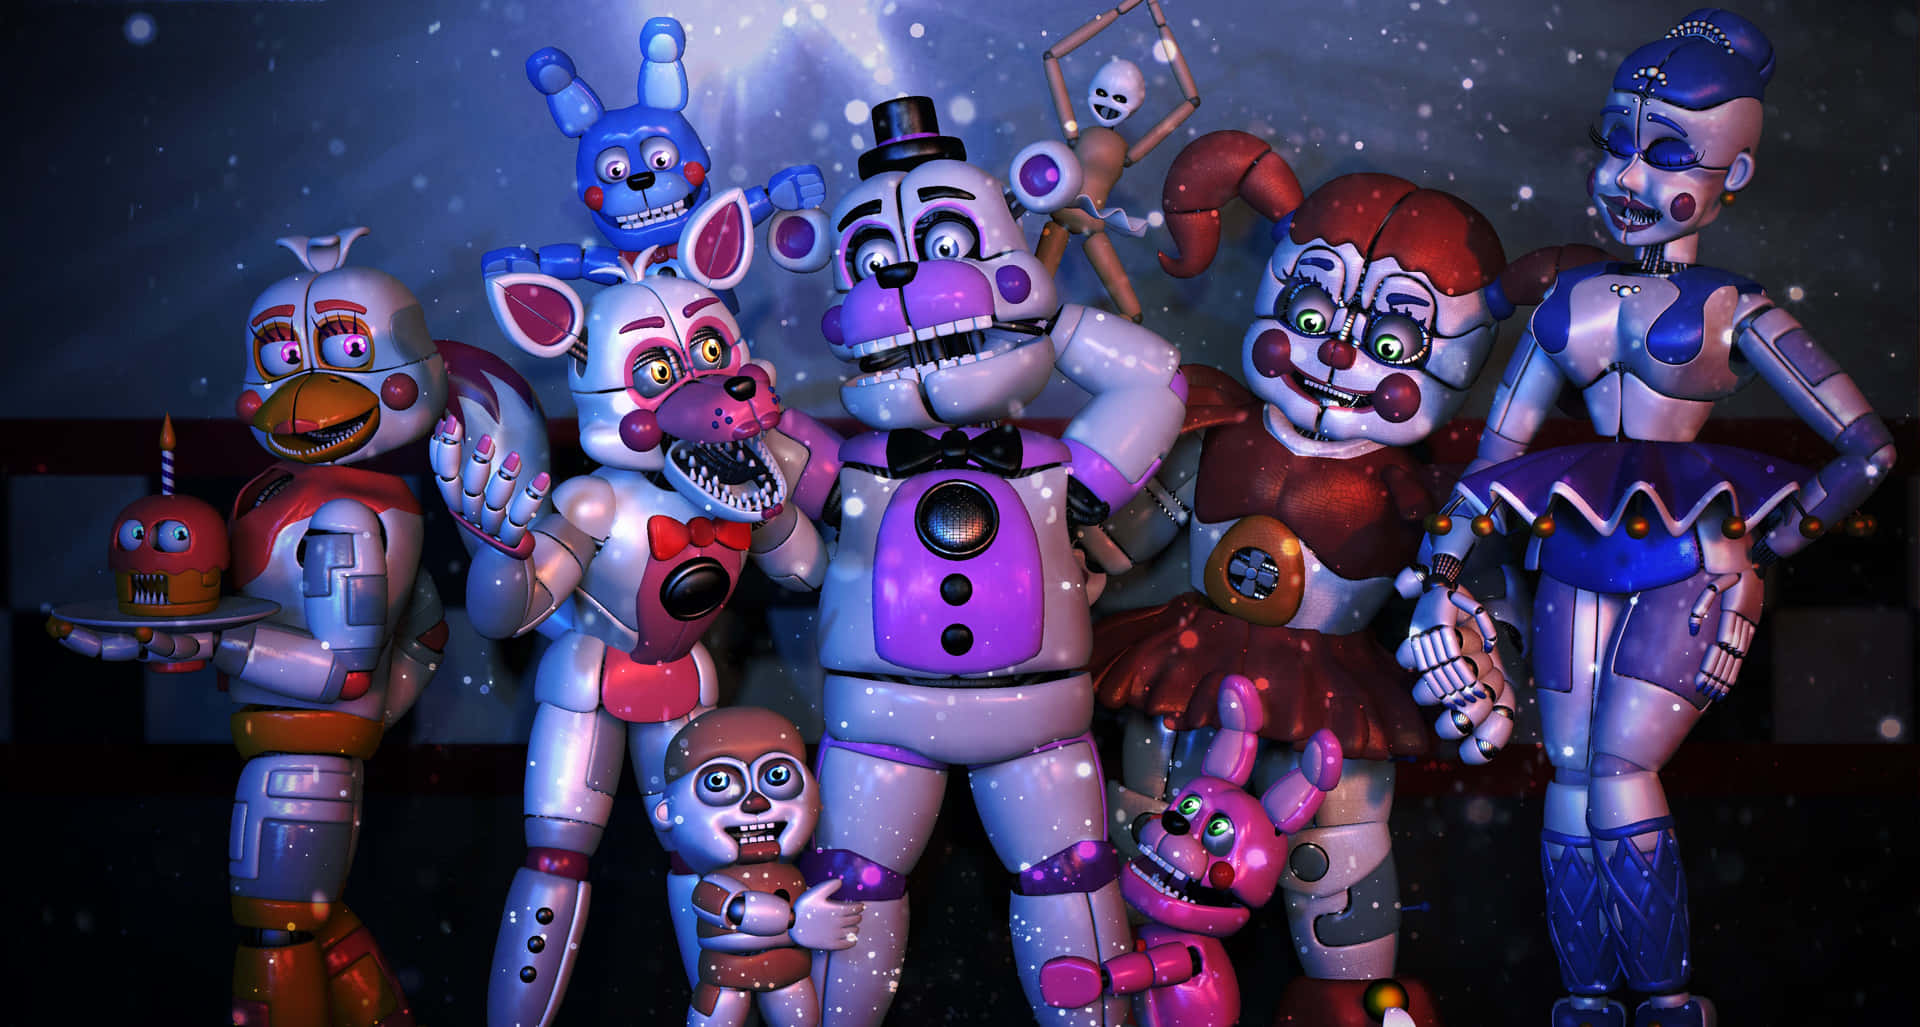 Advanced Animatronic Characters in Action Wallpaper